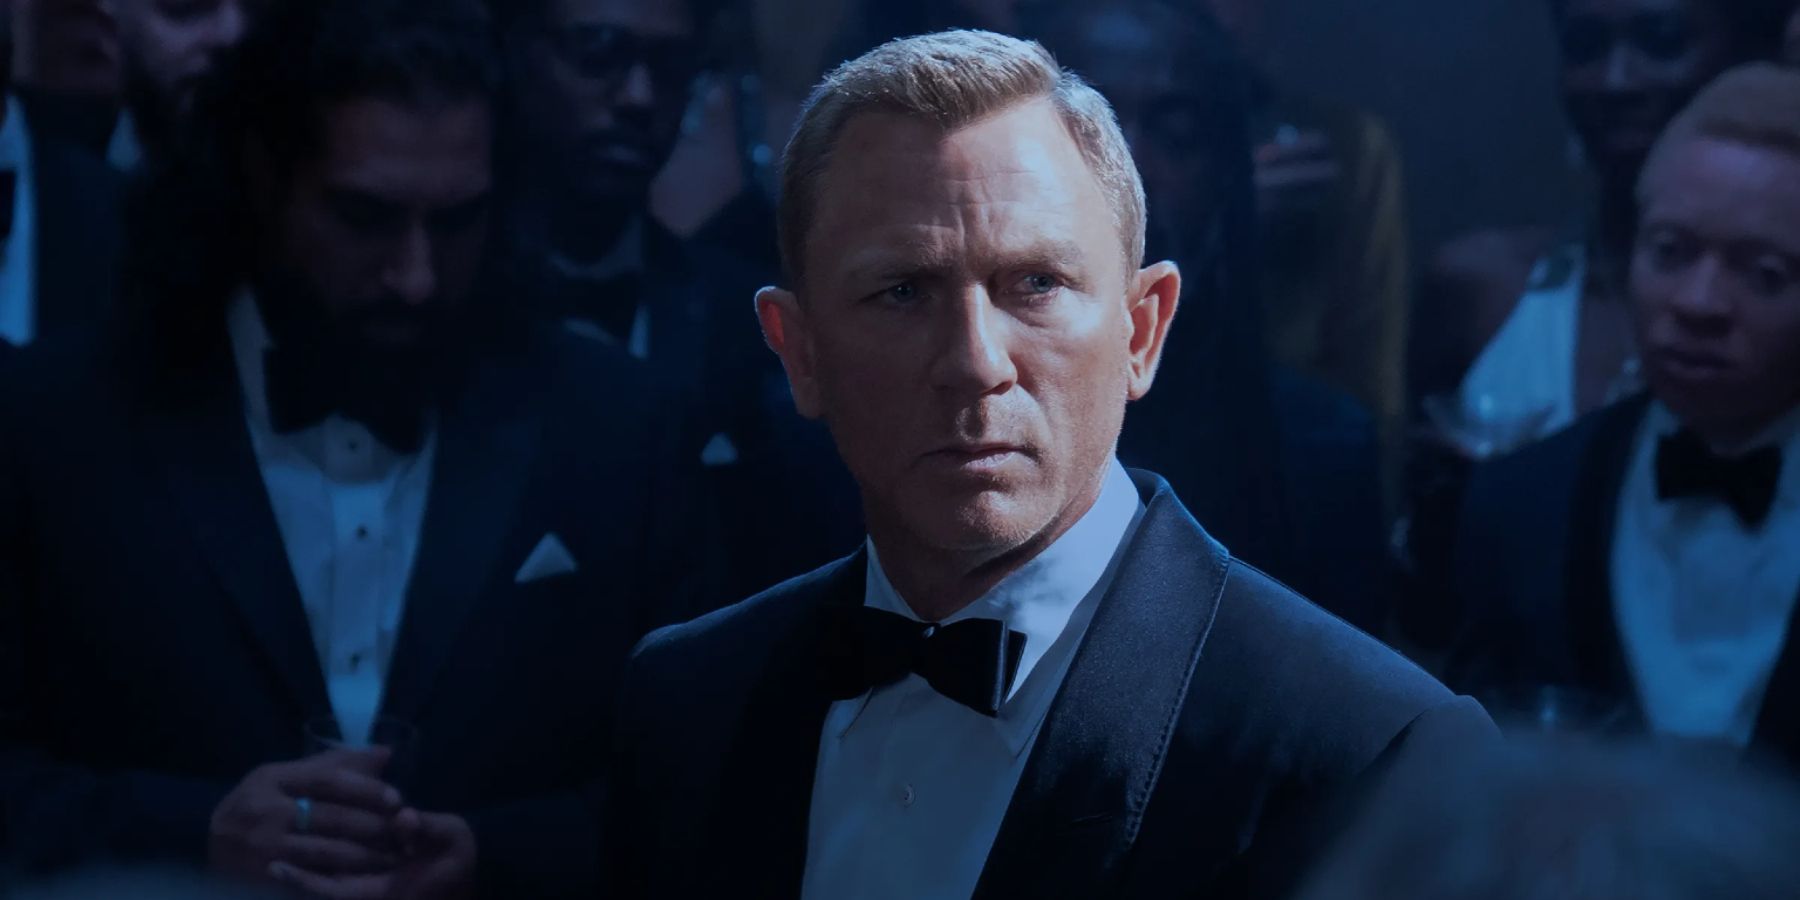 James Bond Producer Gives Update On The Search For The Next 007